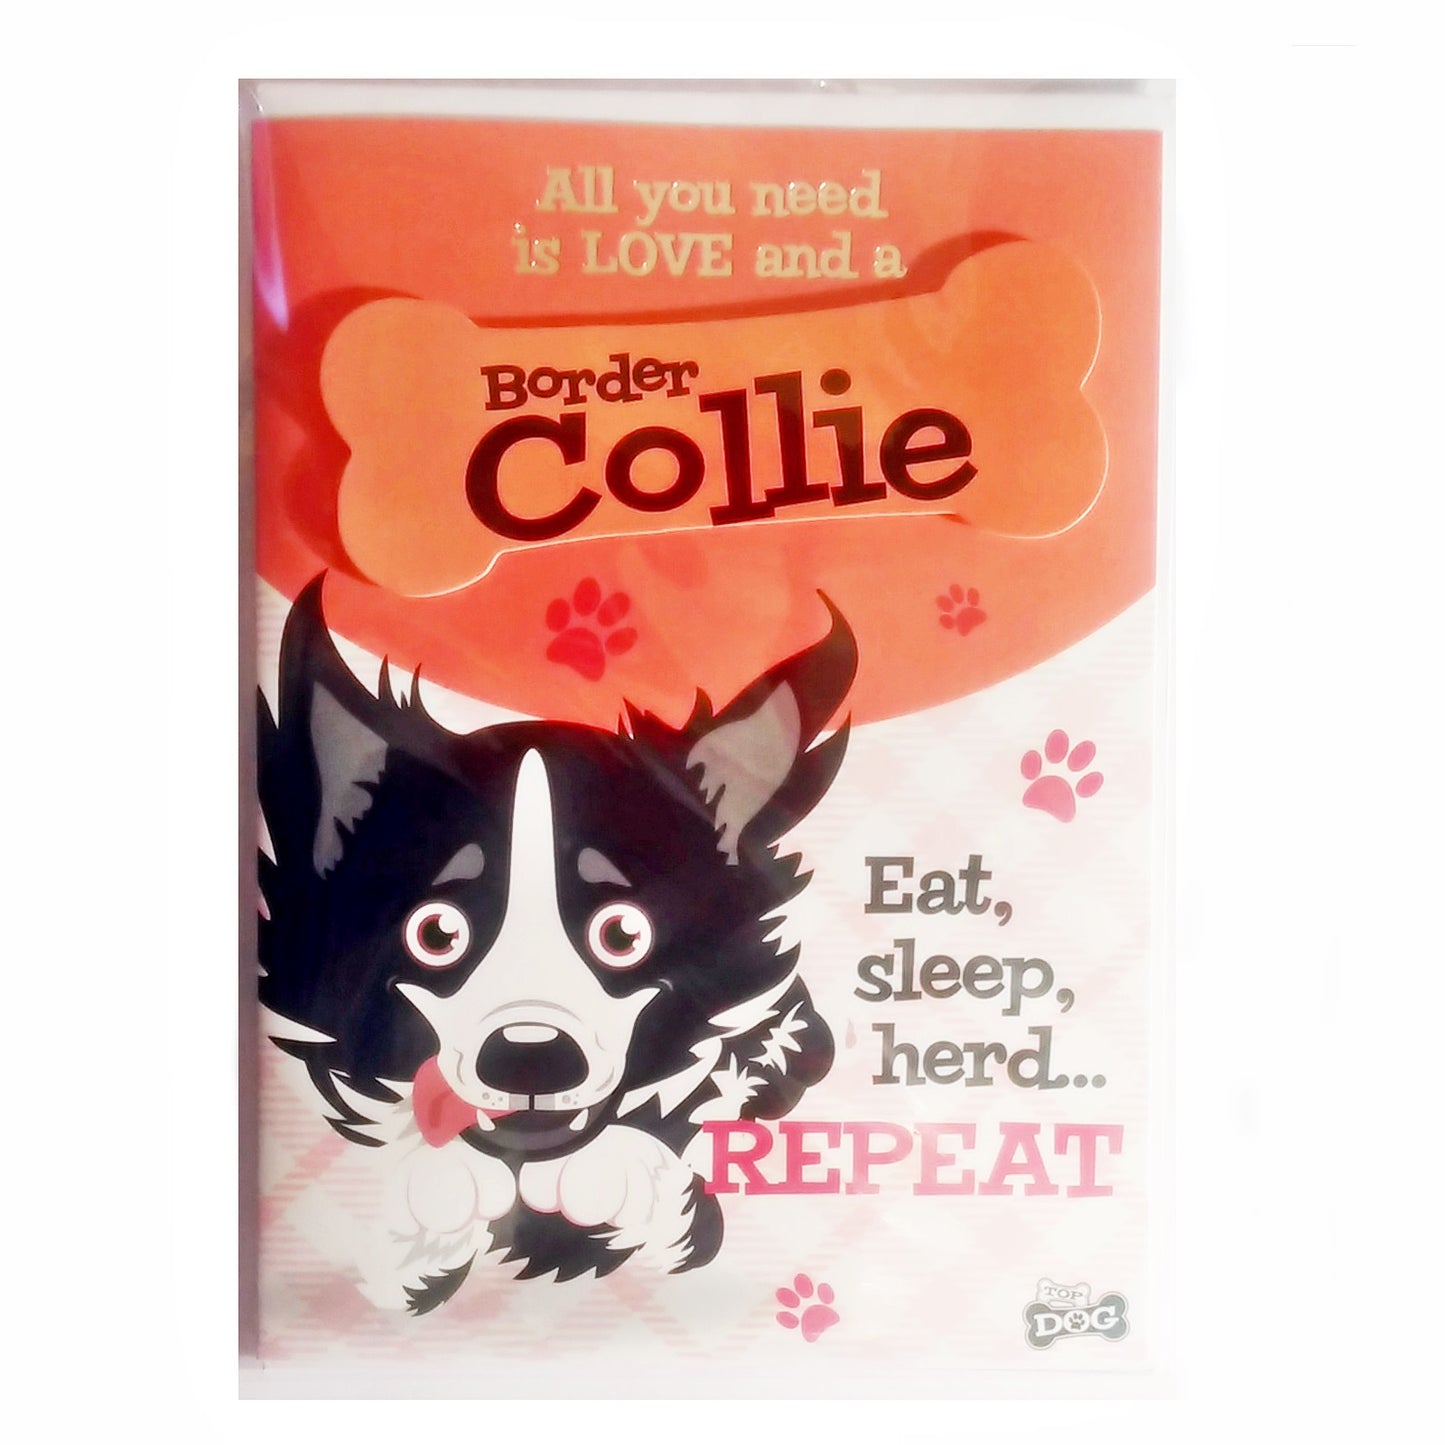 Wags & Whiskers Dog Greeting Card "Border Collie" by Paper Island